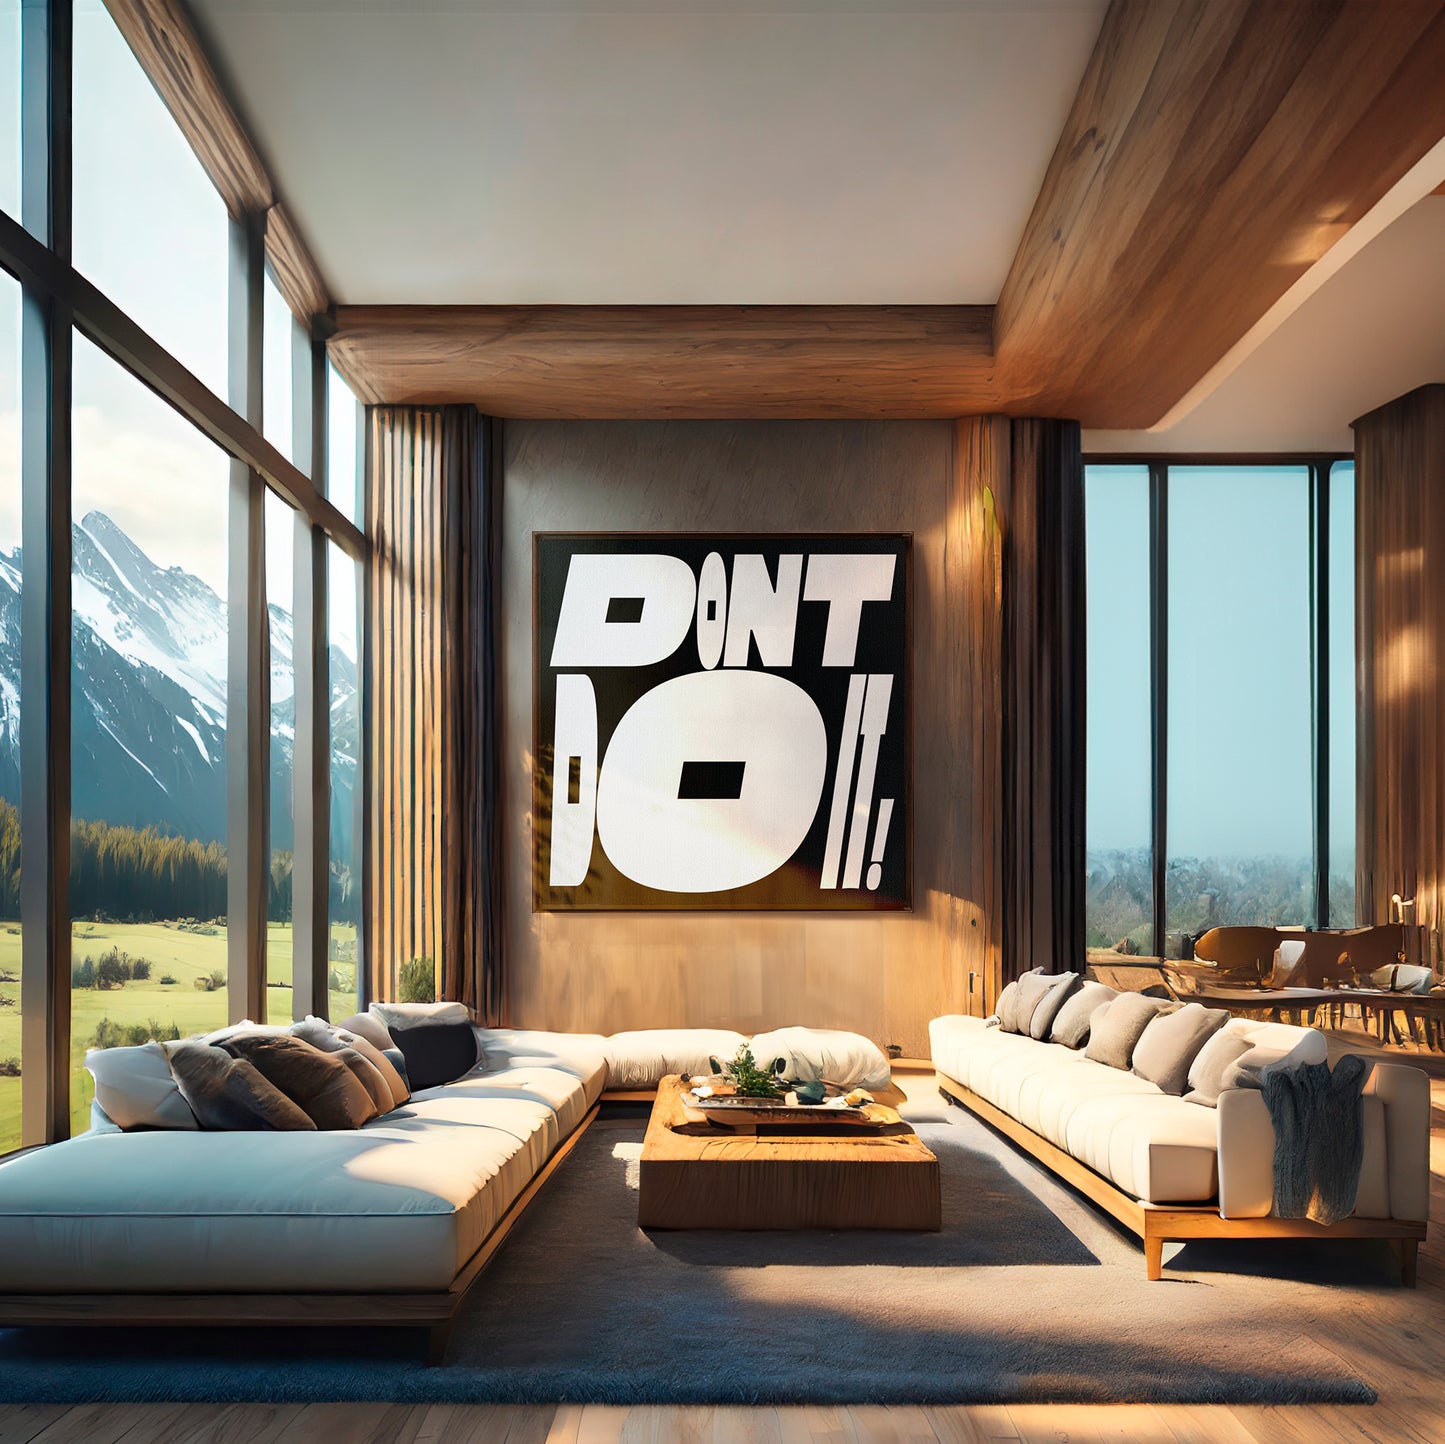 Canvas print | DON'T DO IT! | LIMITED EDITION - 50 PIECES